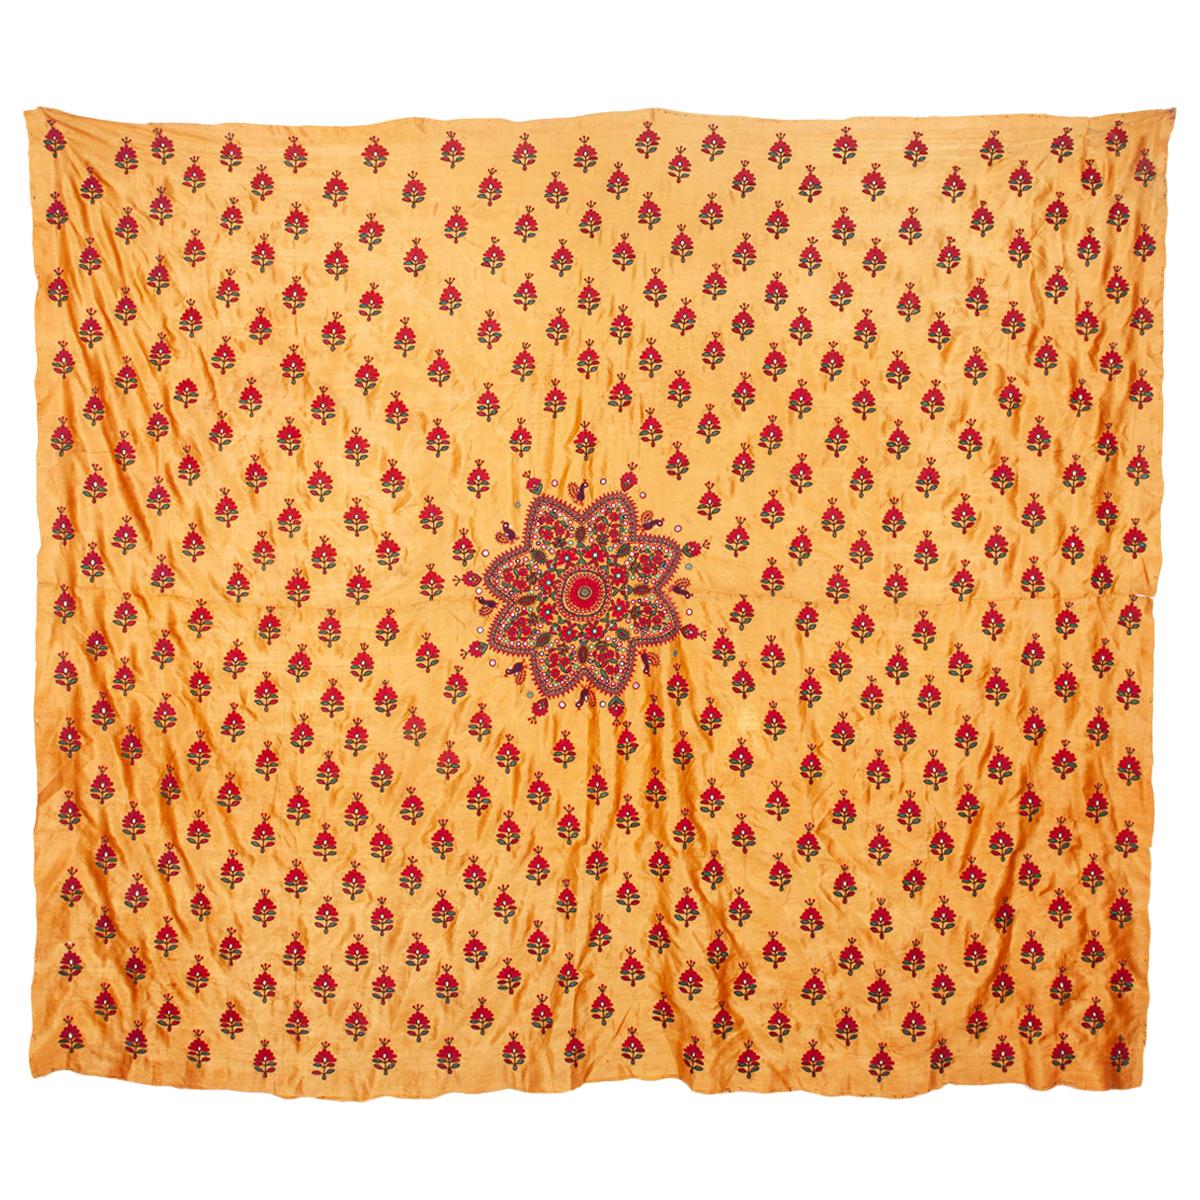 Silk Embroidery from Gujarad, India, Early 20th Century